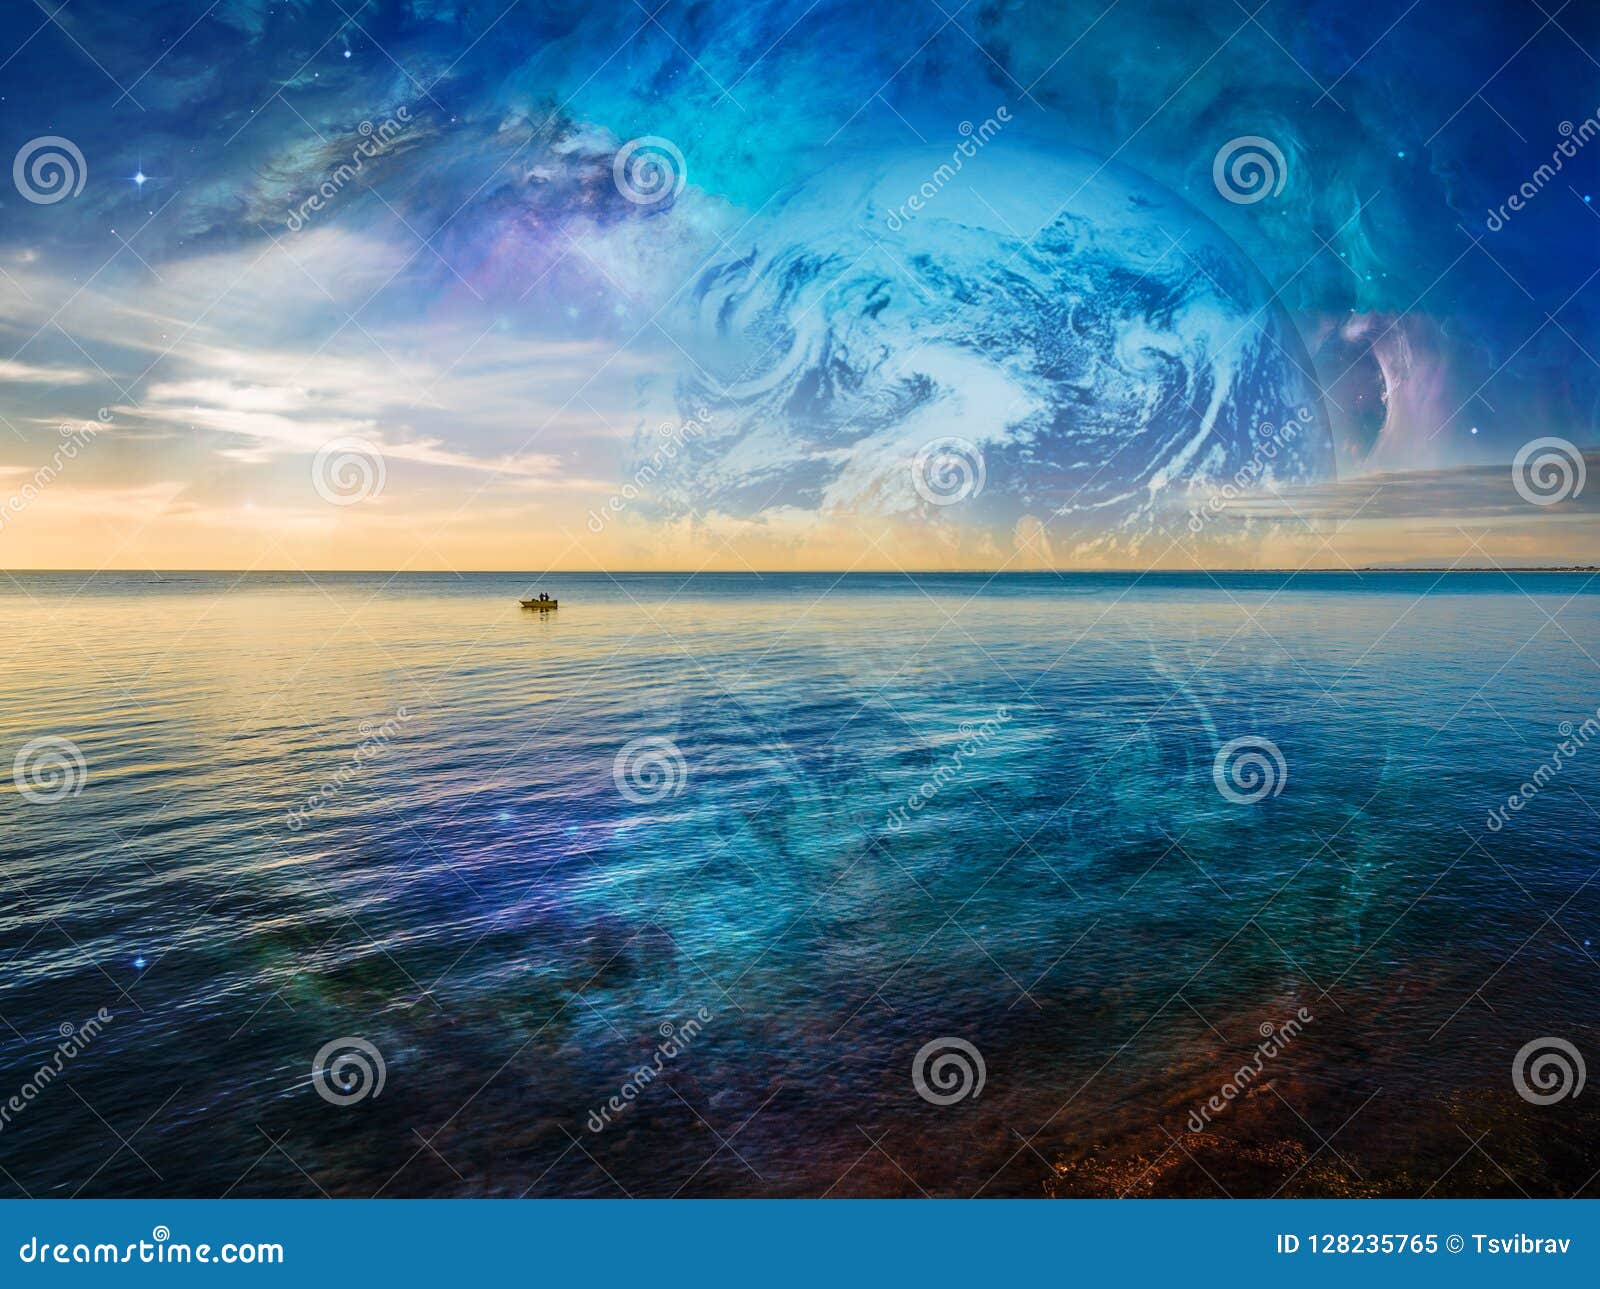 fantasy landscape - lonely fishing boat floating on tranquil ocean water.